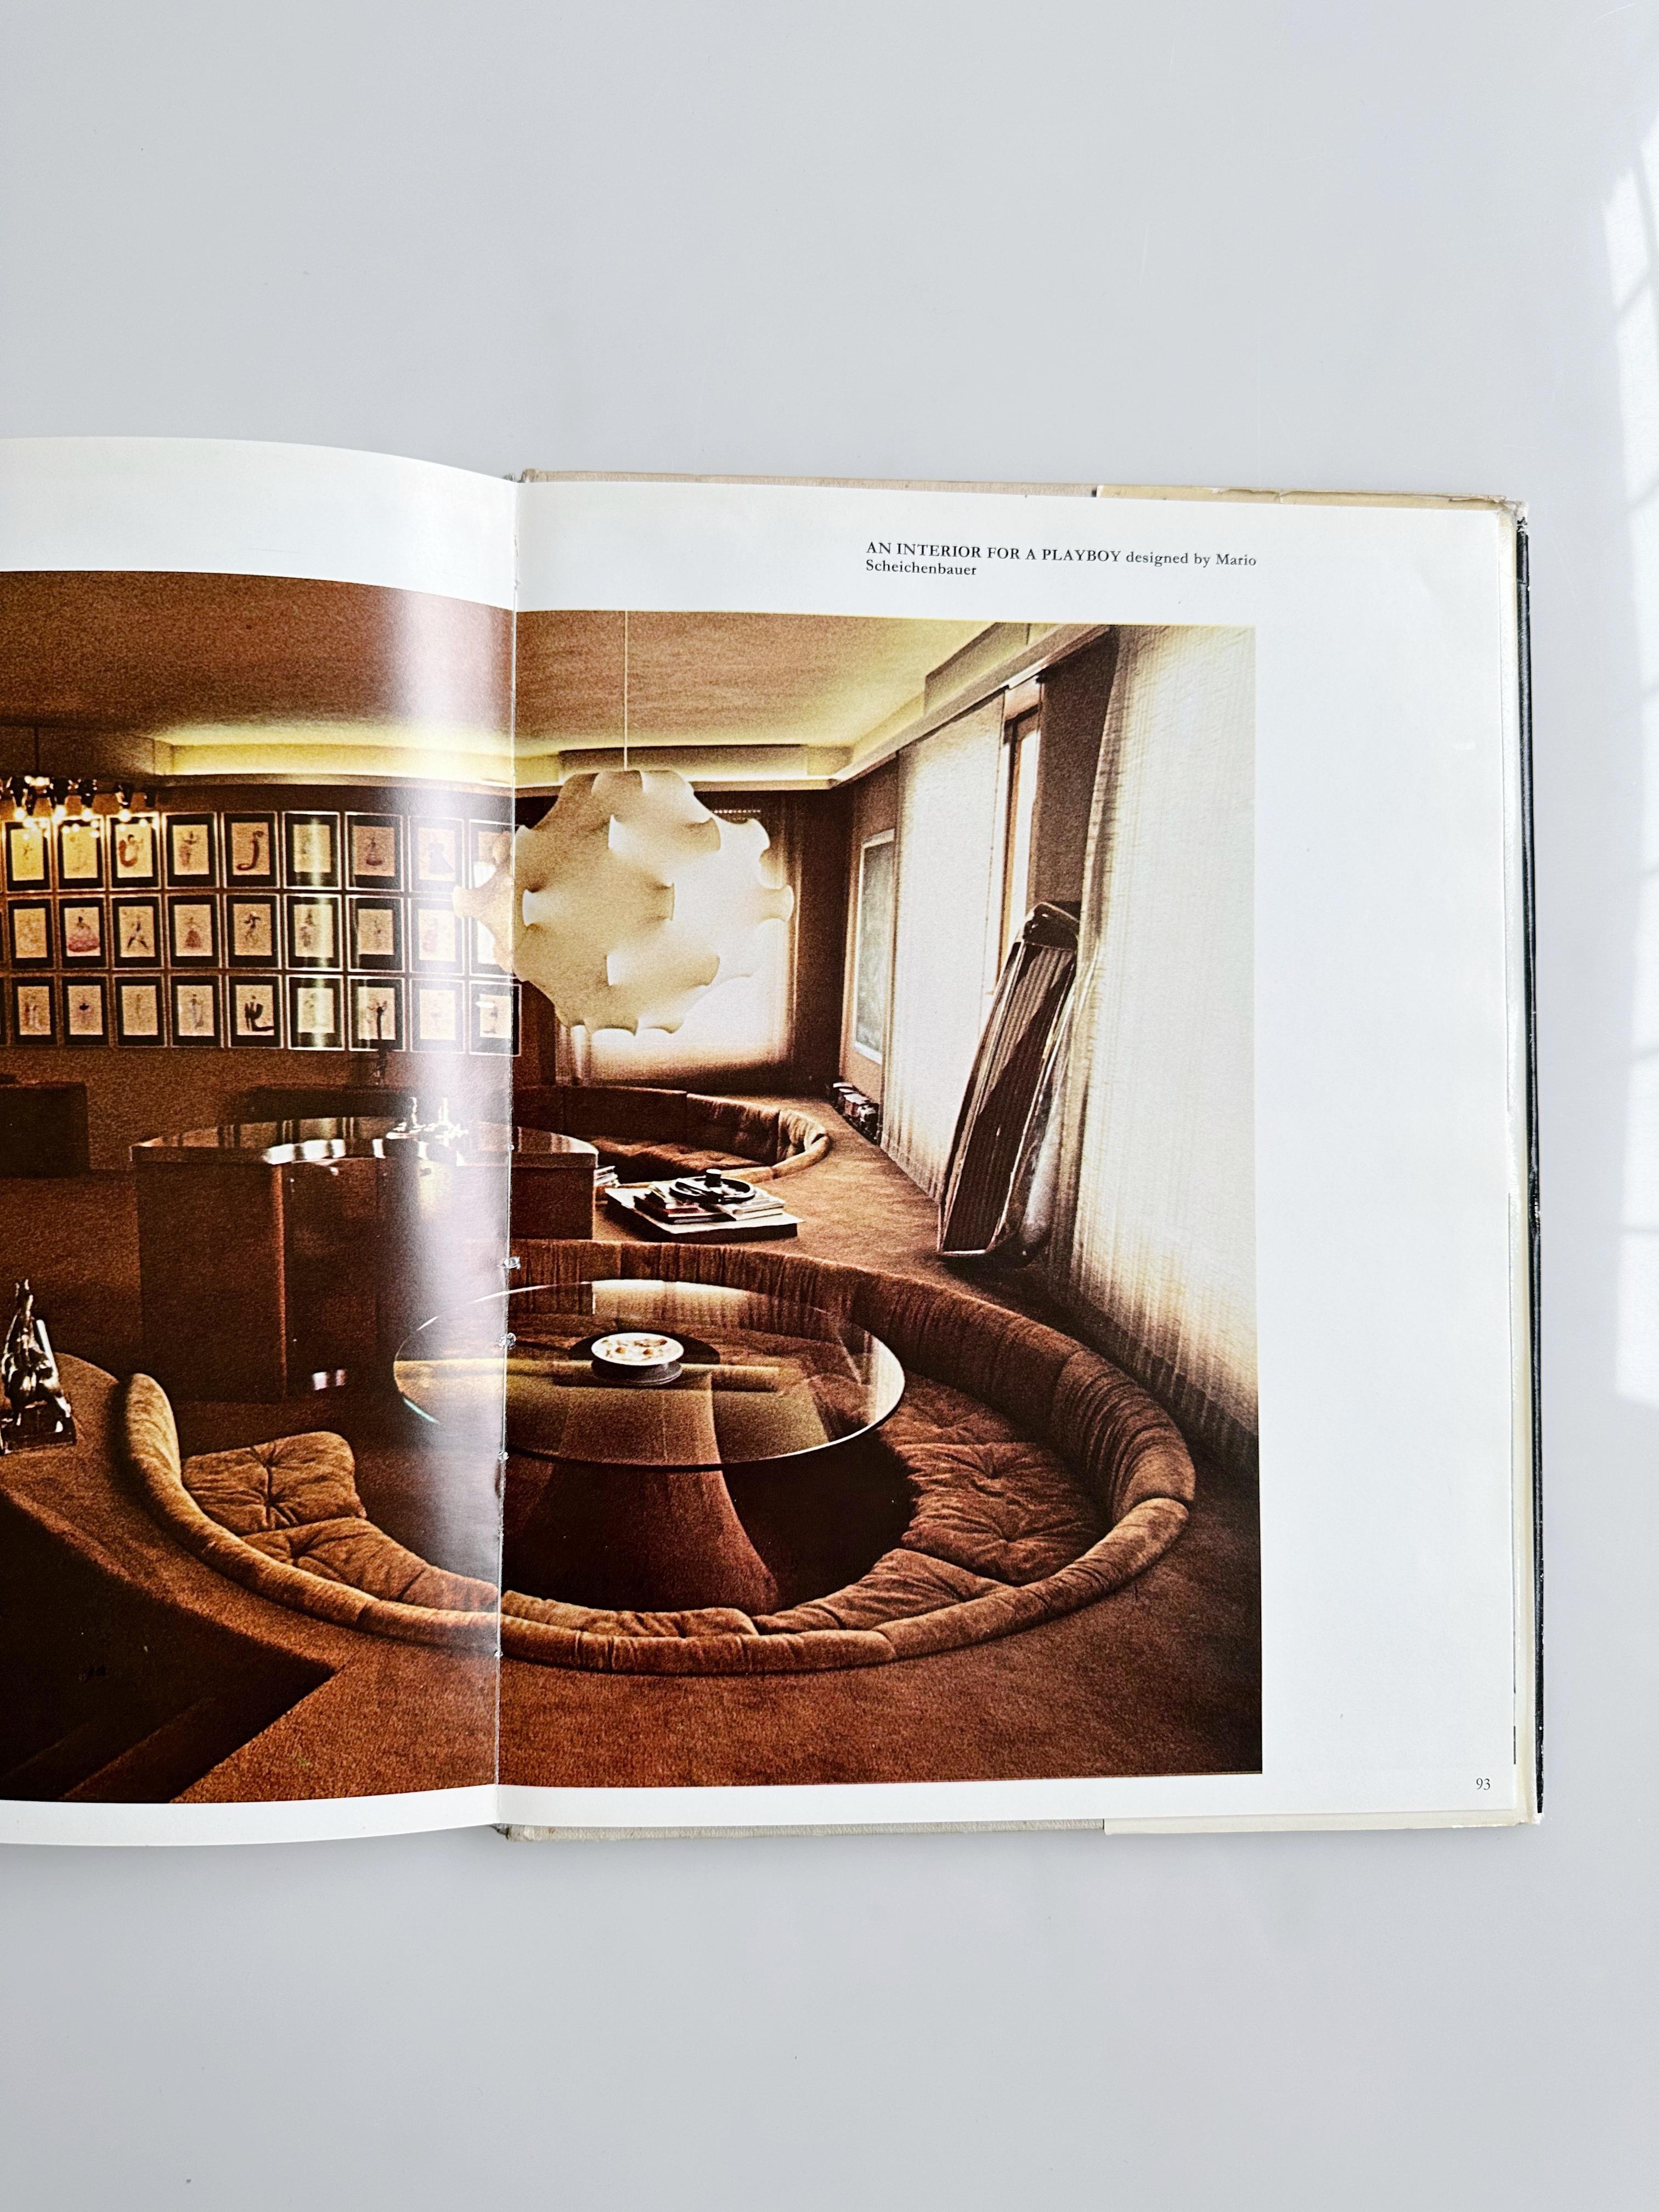 One Room Interiors: 34 Designs From Around The World, 1979 3